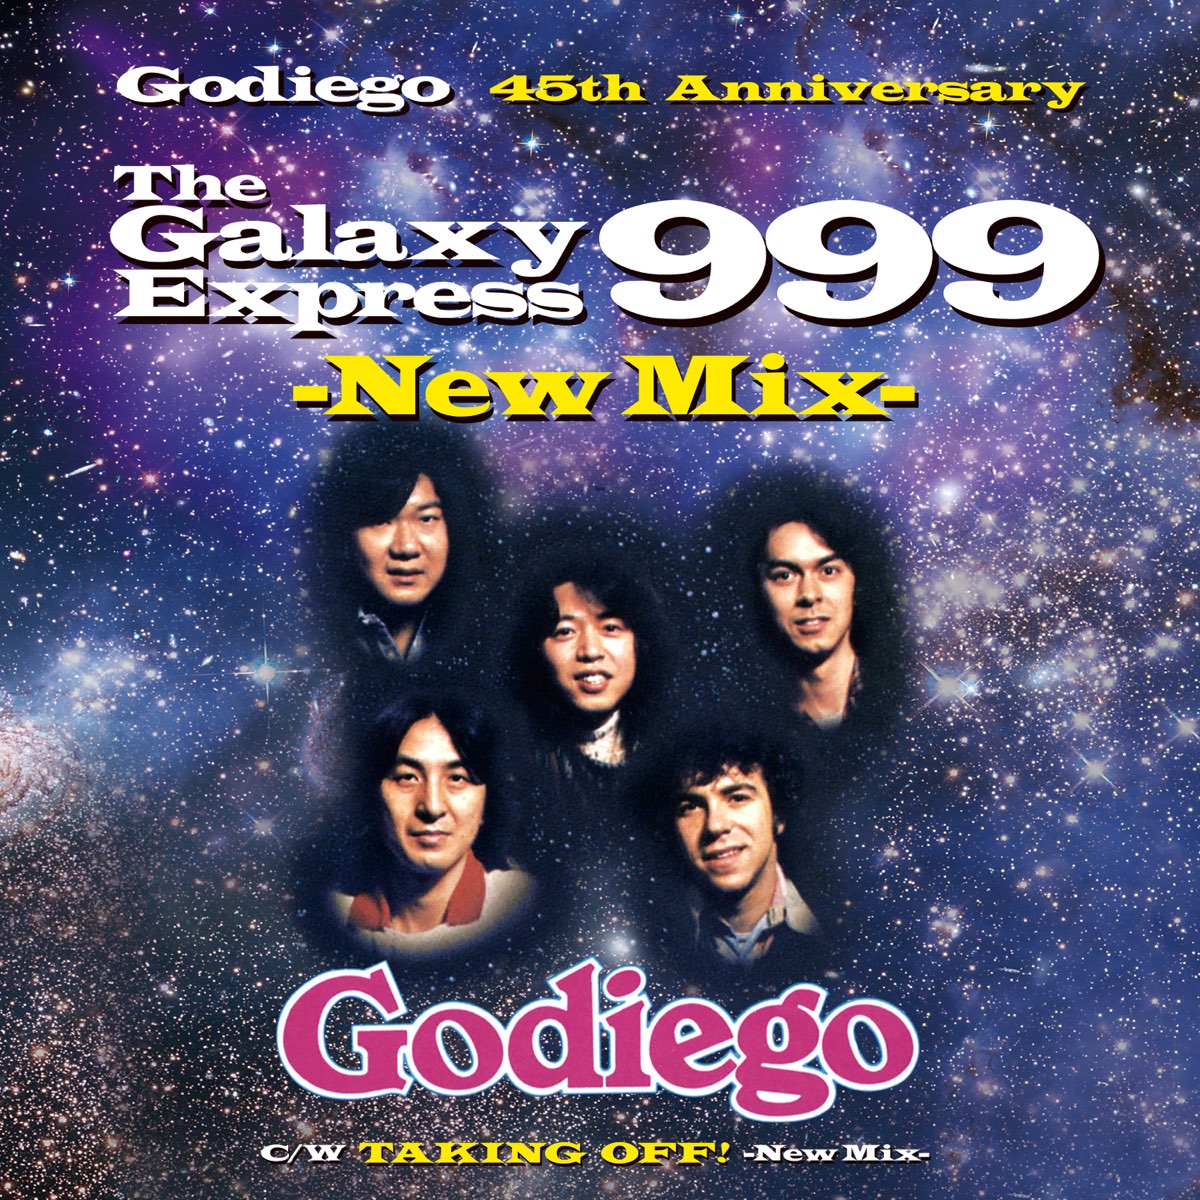 The Galaxy Express 999 (New Mix) - Single by Godiego on Apple Music